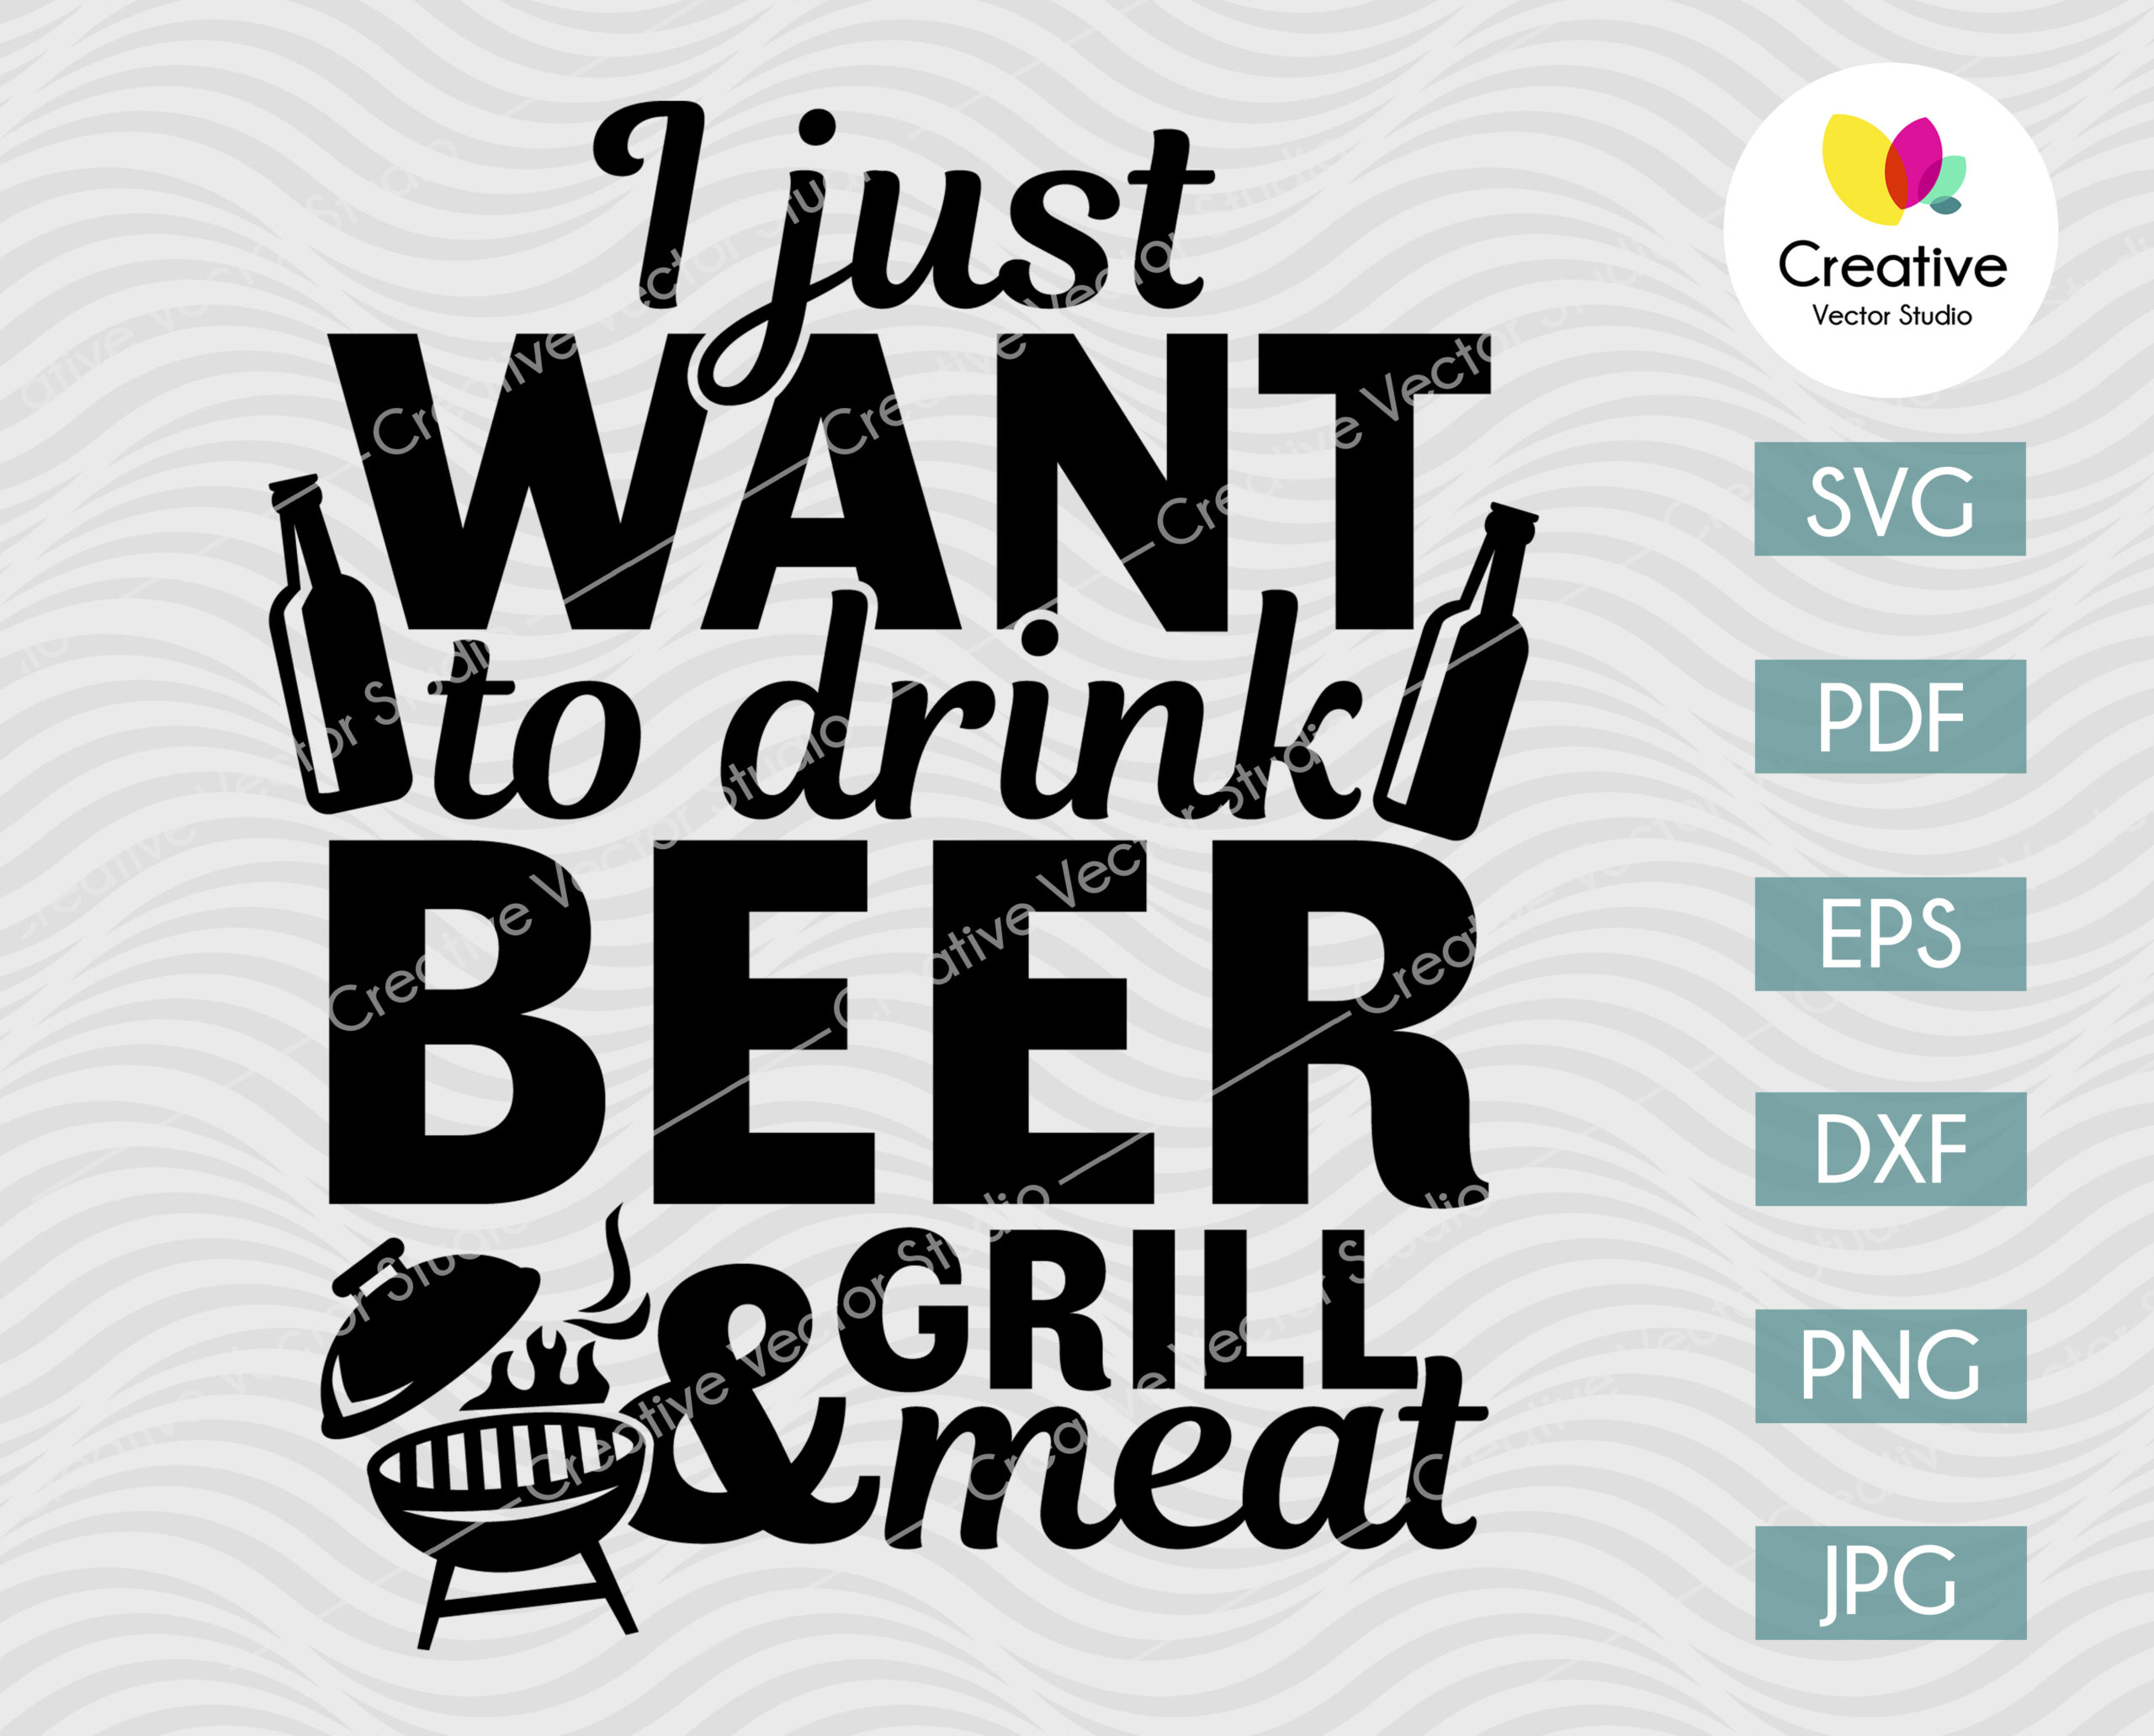 I Just Want To Drink Beer And Grill Meat SVG | Creative Vector Studio